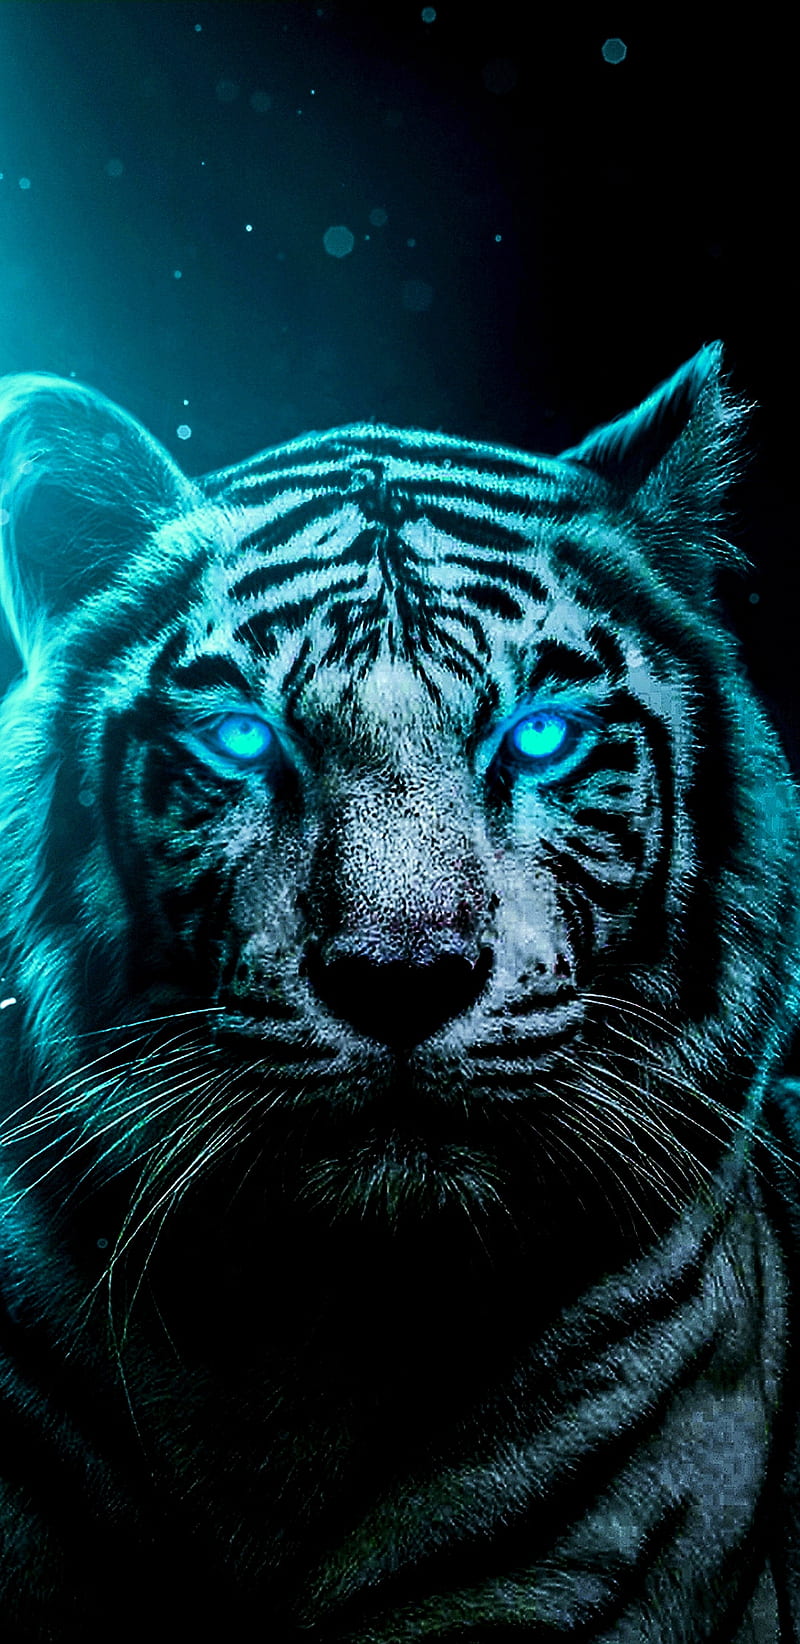 White Tiger  Apps on Galaxy Store  Scary animals Wild animal wallpaper  Tiger pictures